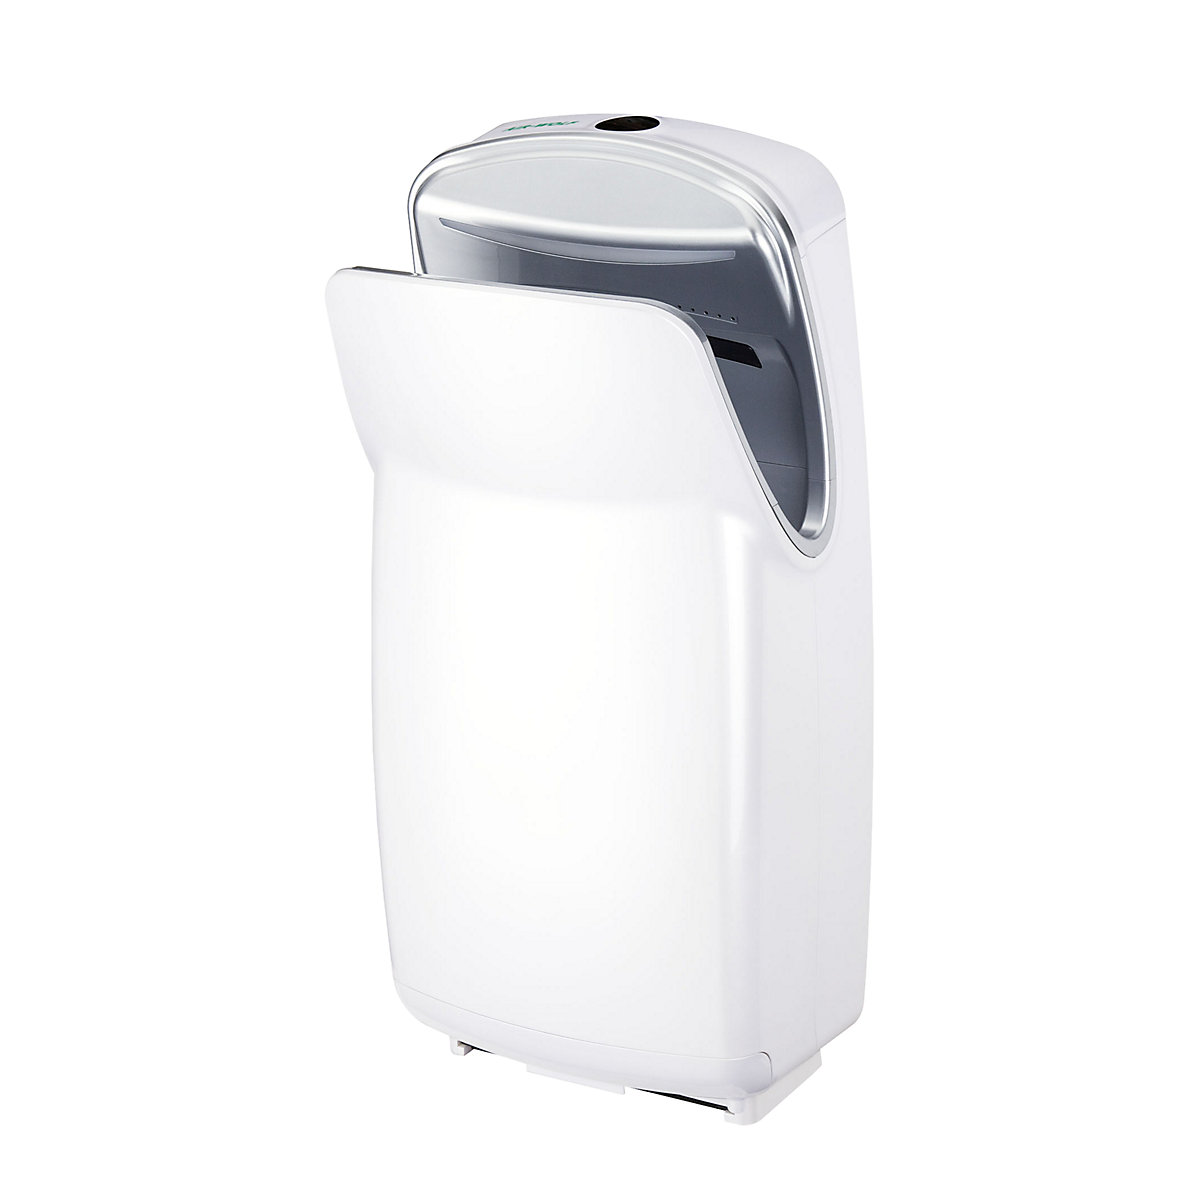 AIR-WOLF – Hand dryer with infrared sensor, with infrared sensor, white